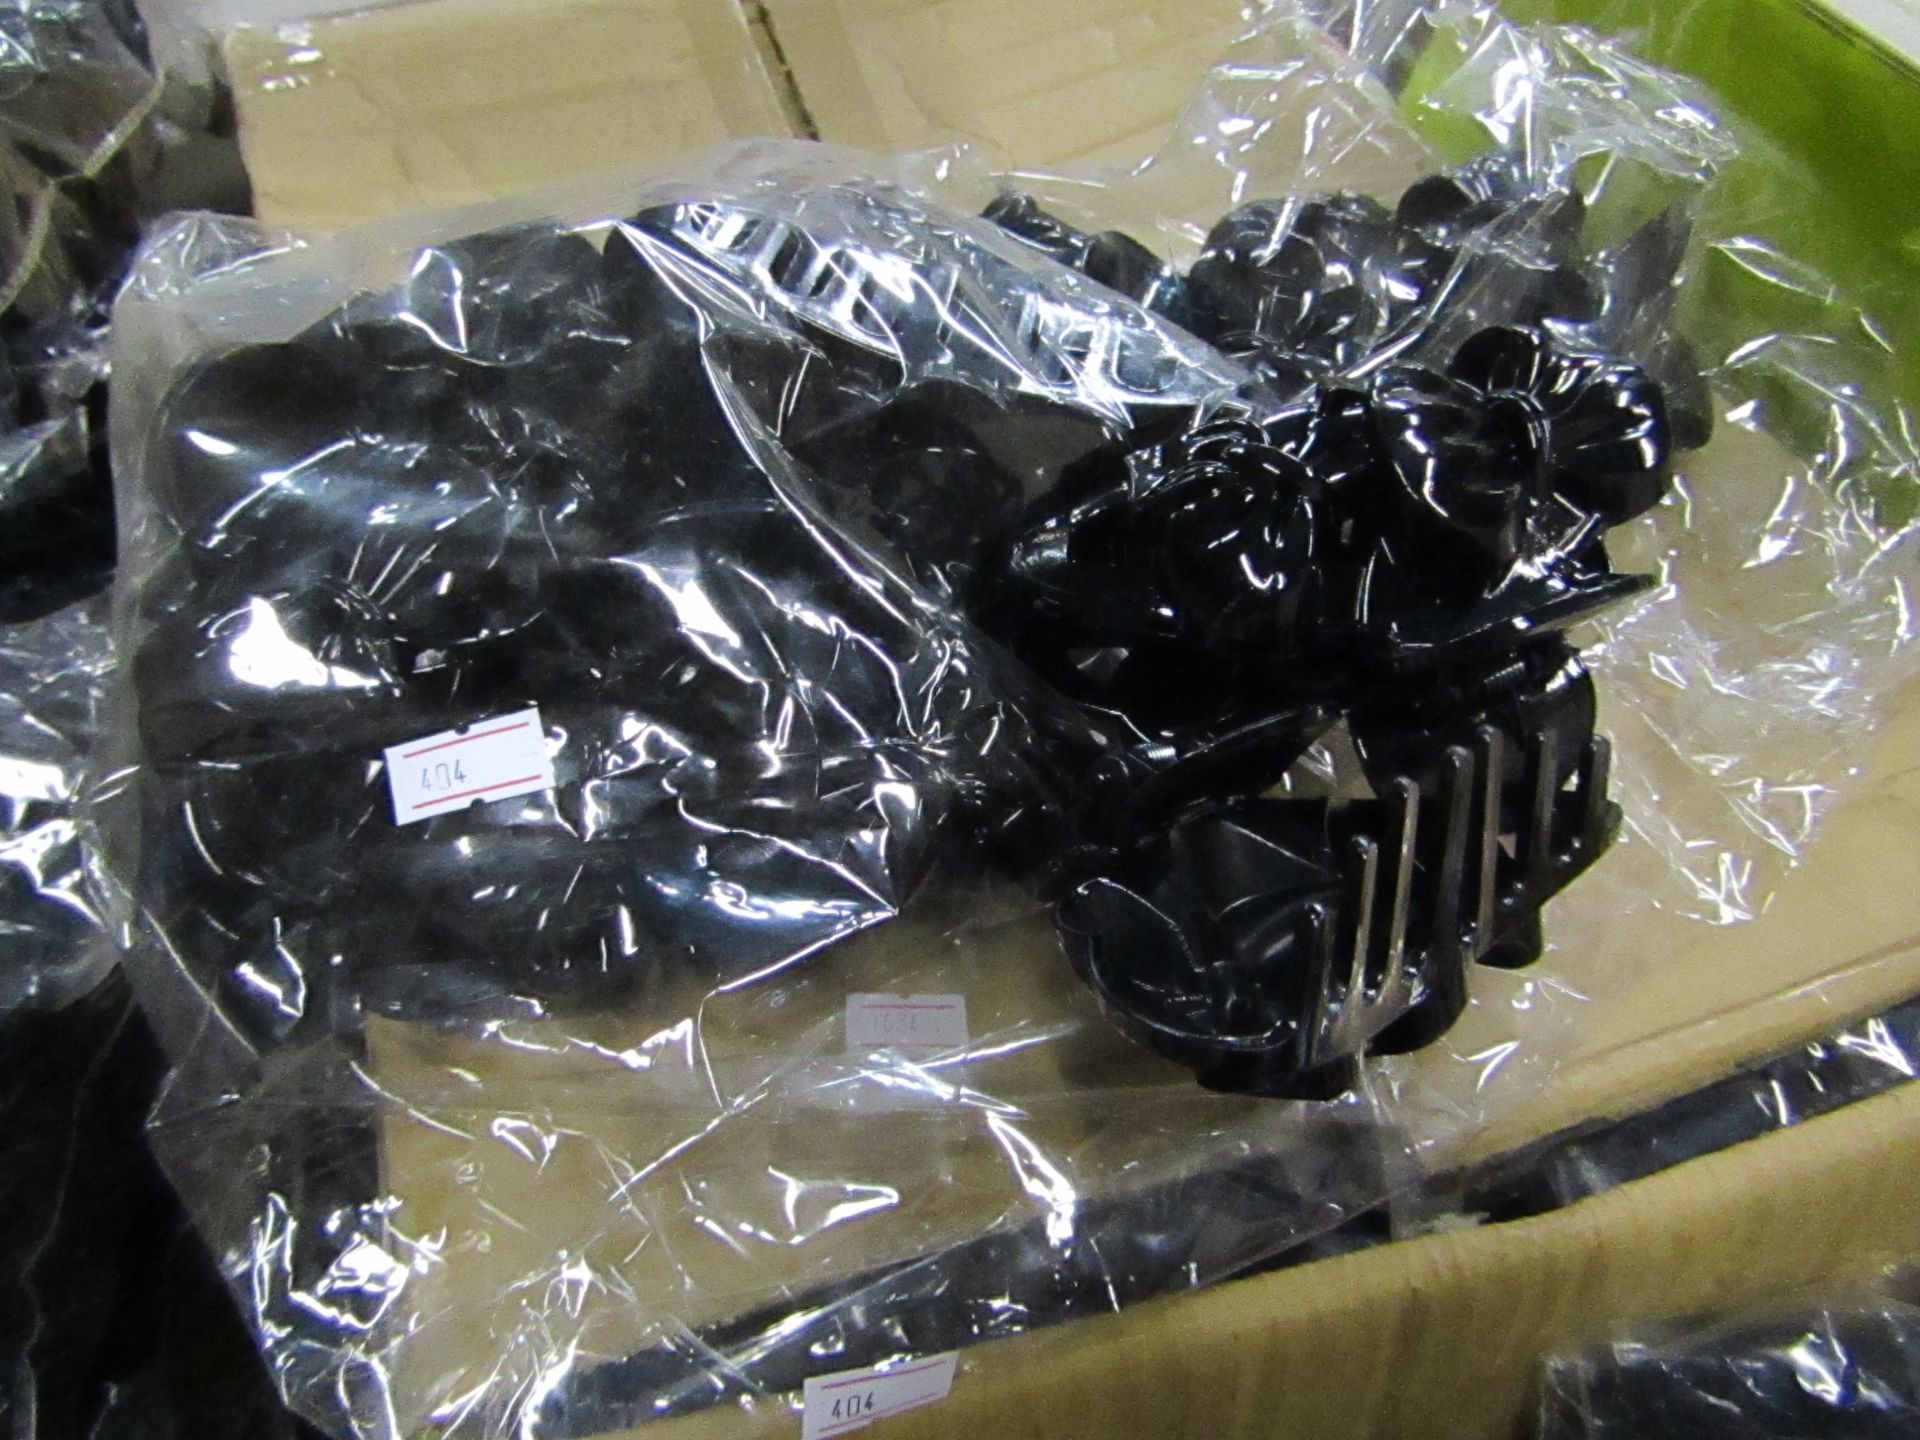 Pack of 12 Large Hair Clips (Black) - All New & Packaged.